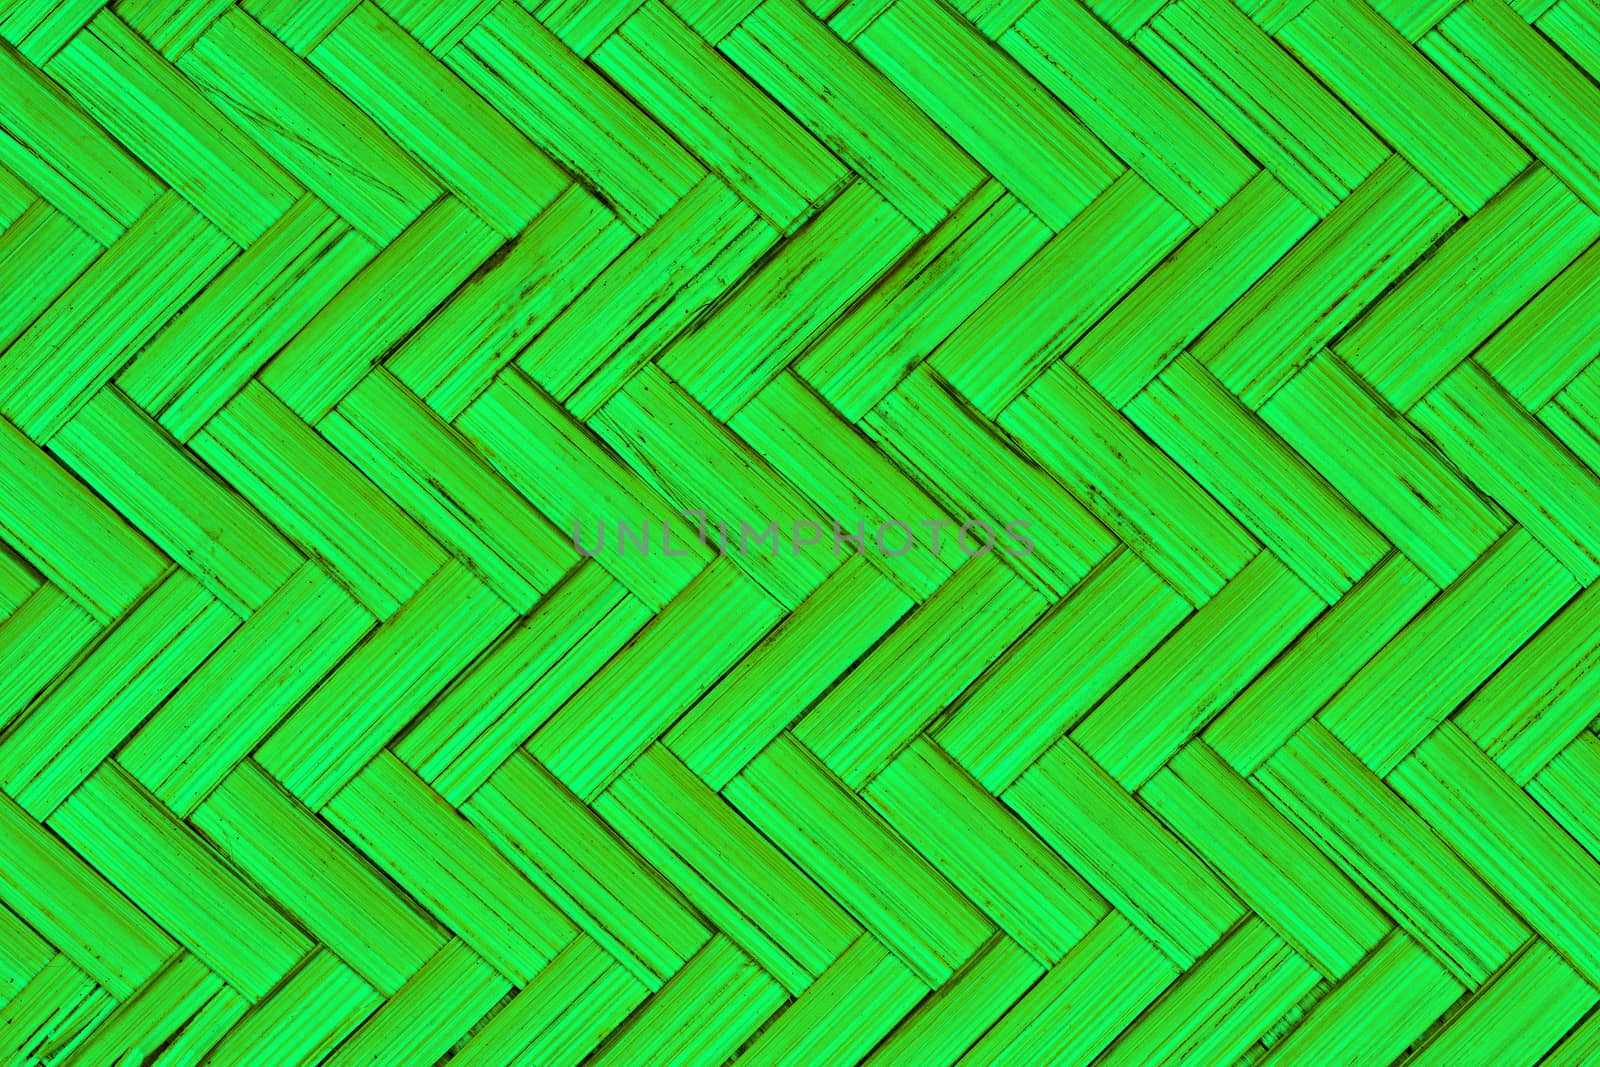 Green boards, a background or texture